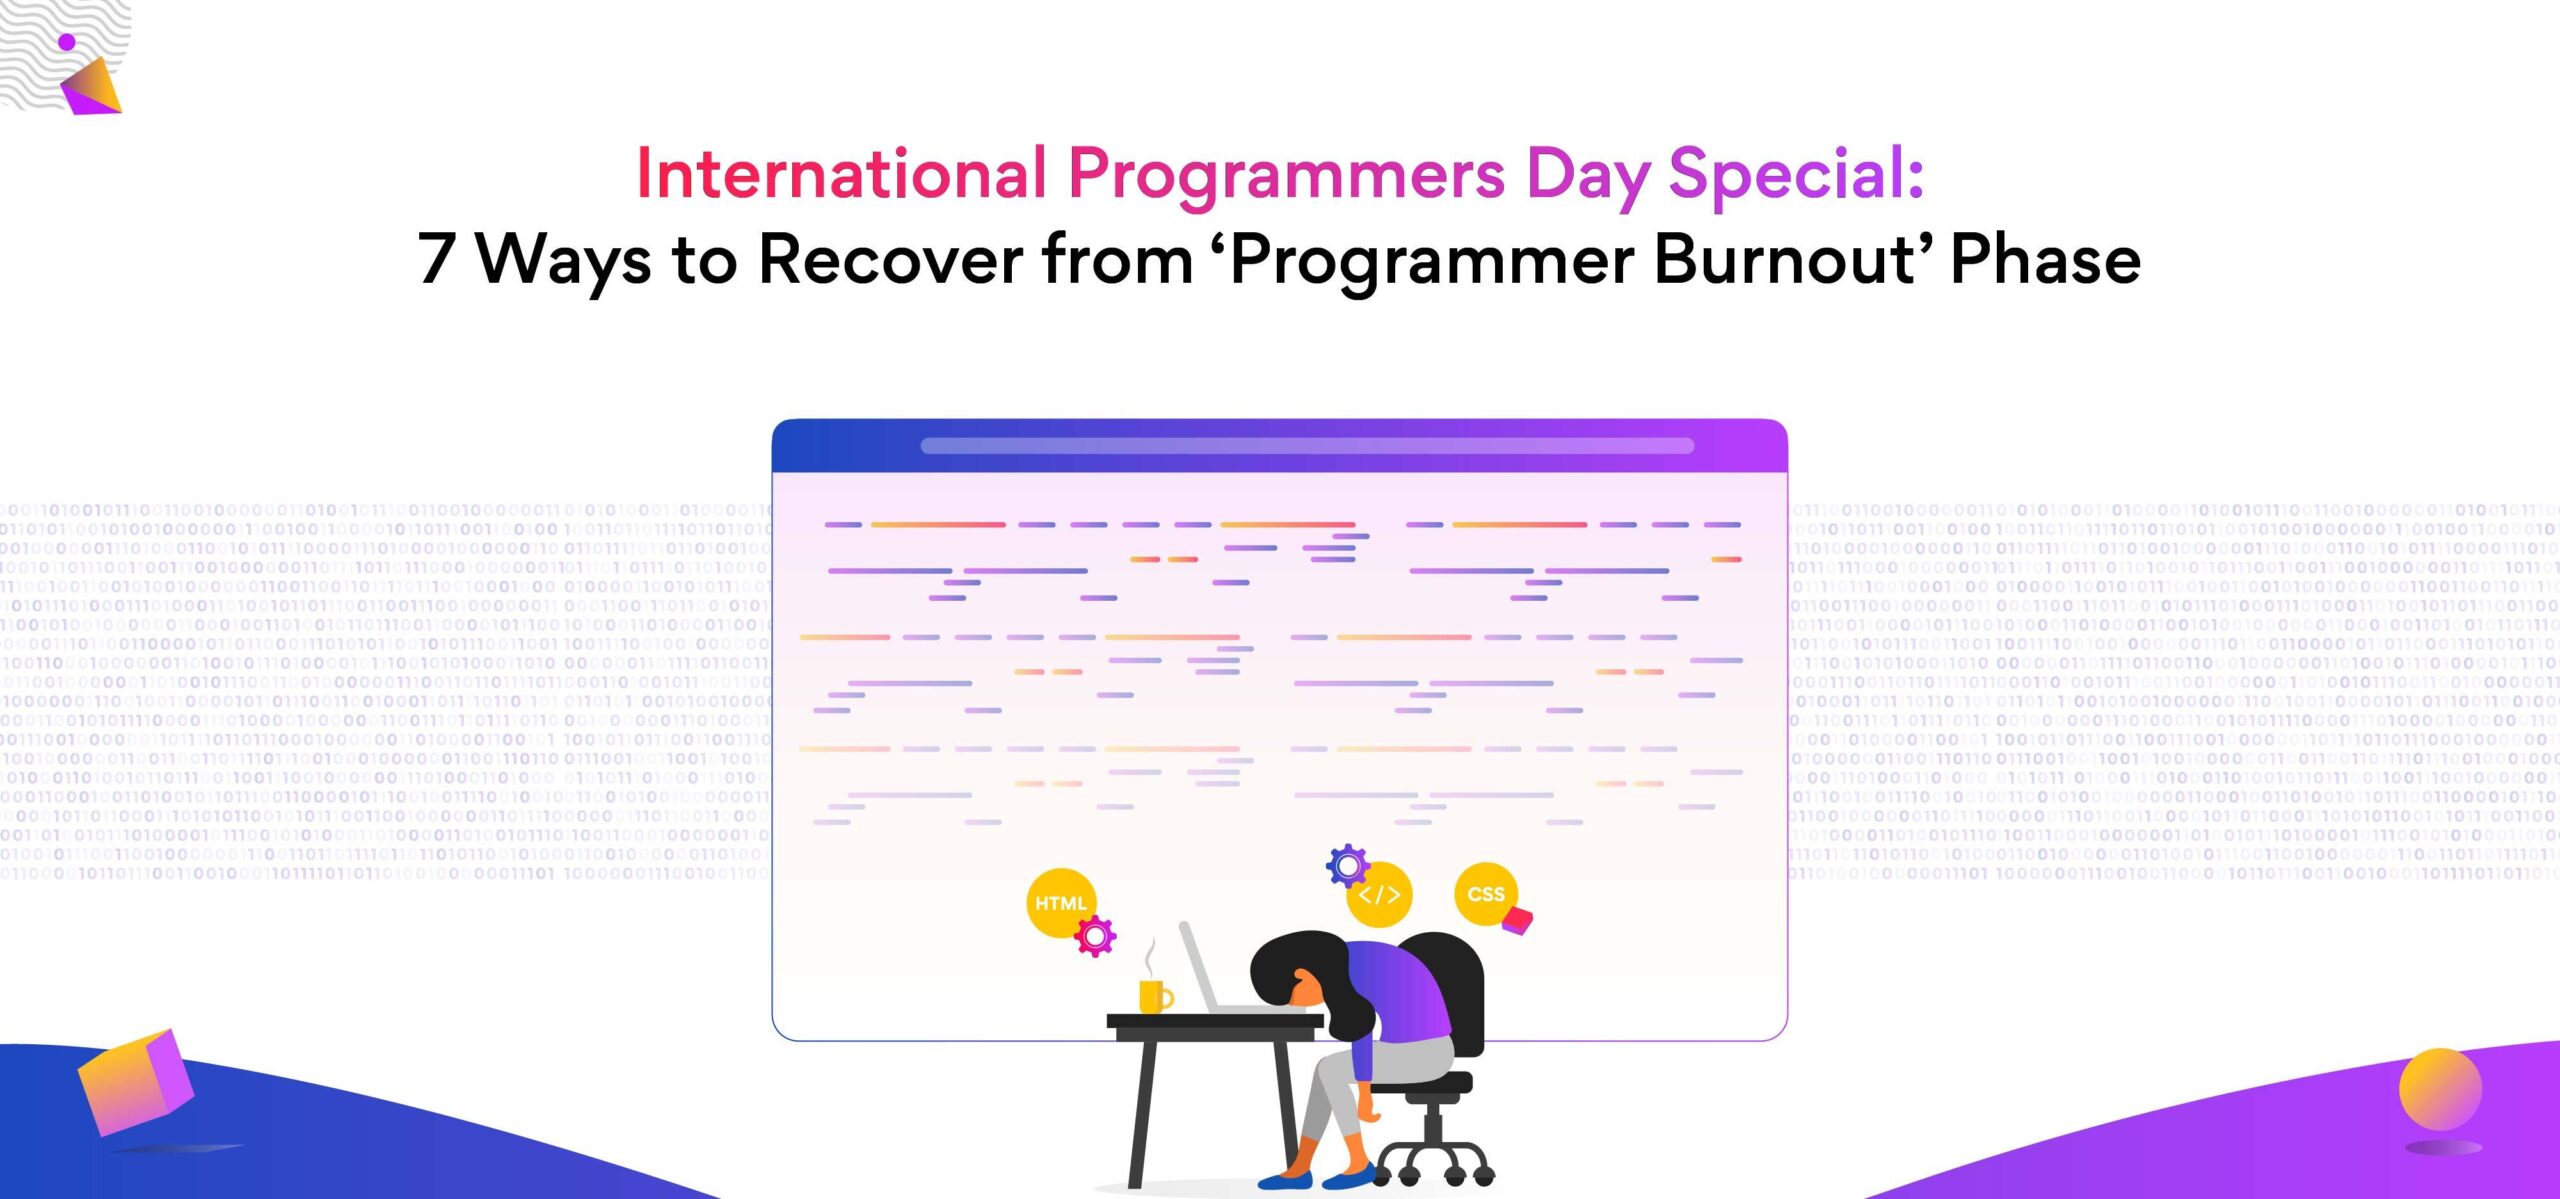 How to Recover from the Programmer Burnout Phase?